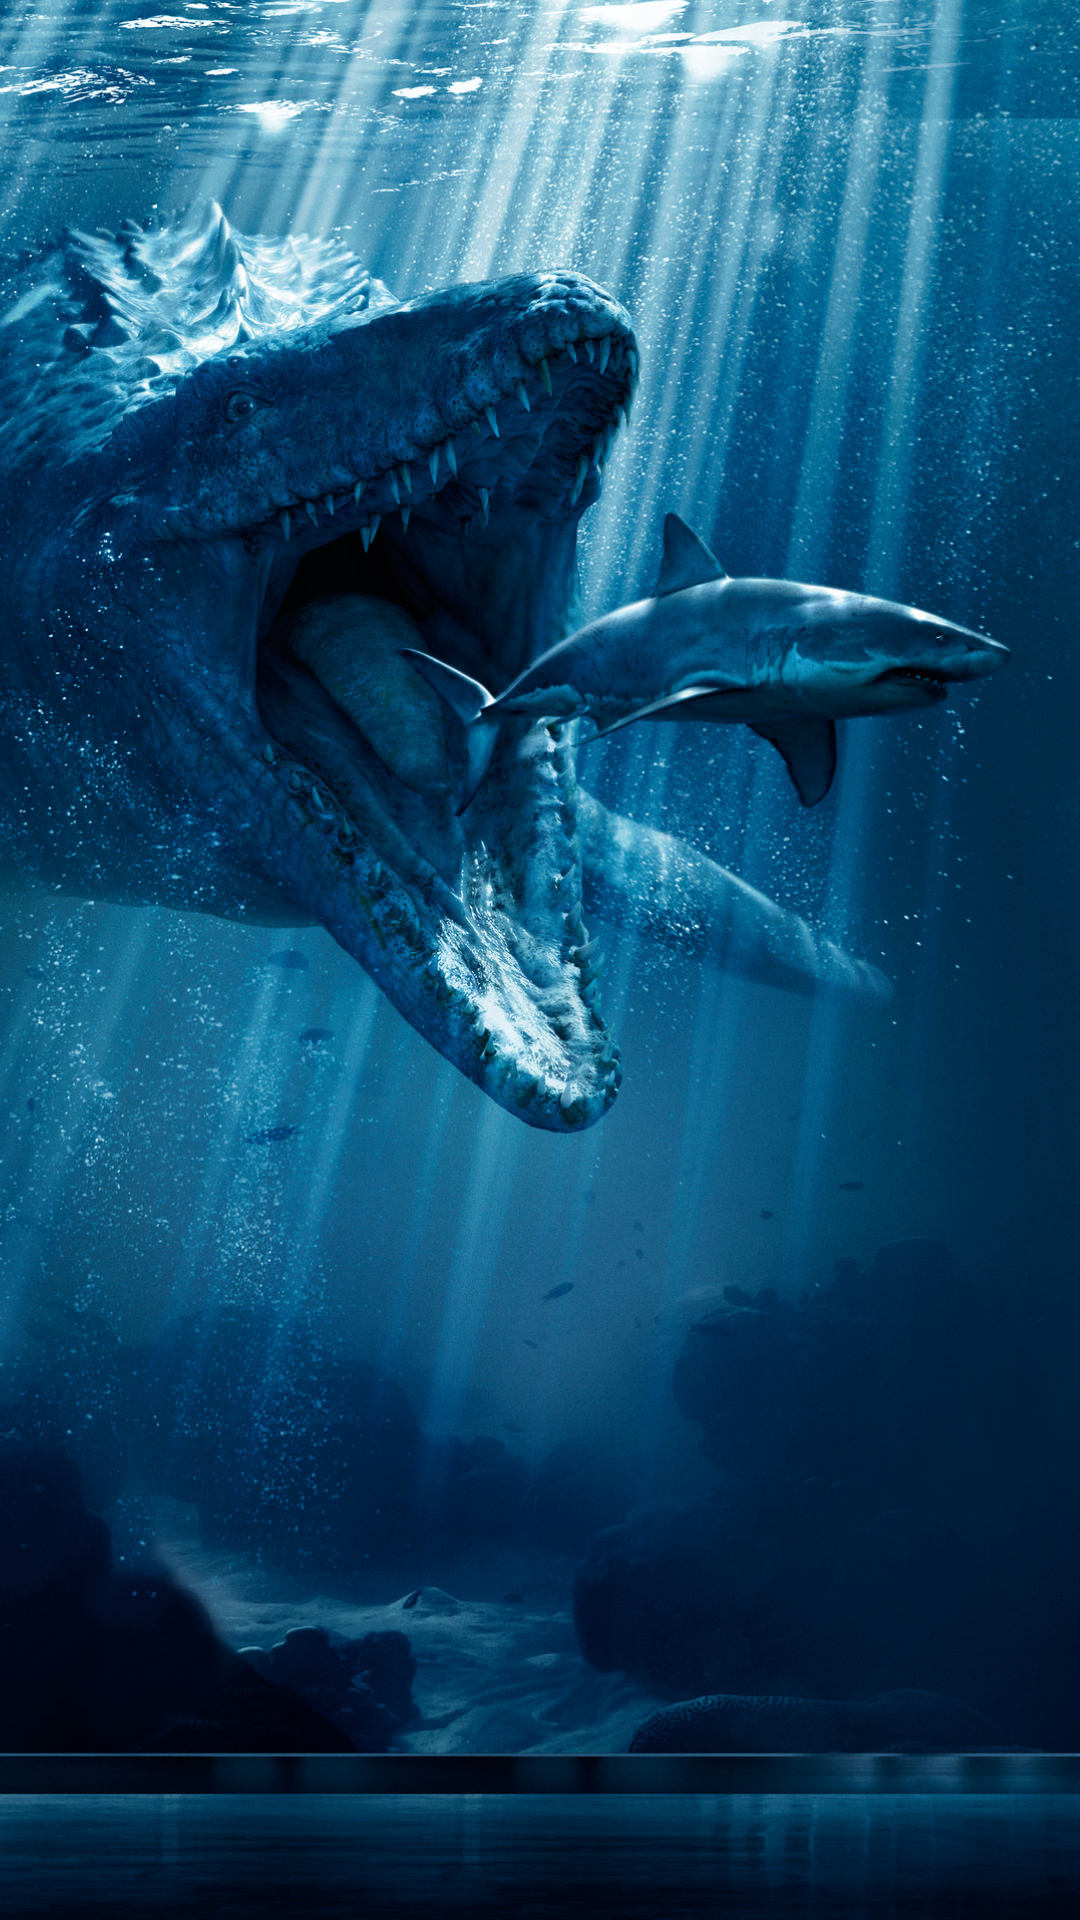 1080x19 Mosasaurus Shark Snack Poster From Jurassic World 18 Iphone 7 6s 6 Plus And Pixel Xl One Plus 3 3t 5 Wallpaper Hd Movies 4k Wallpapers Images Photos And Background Wallpapers Den